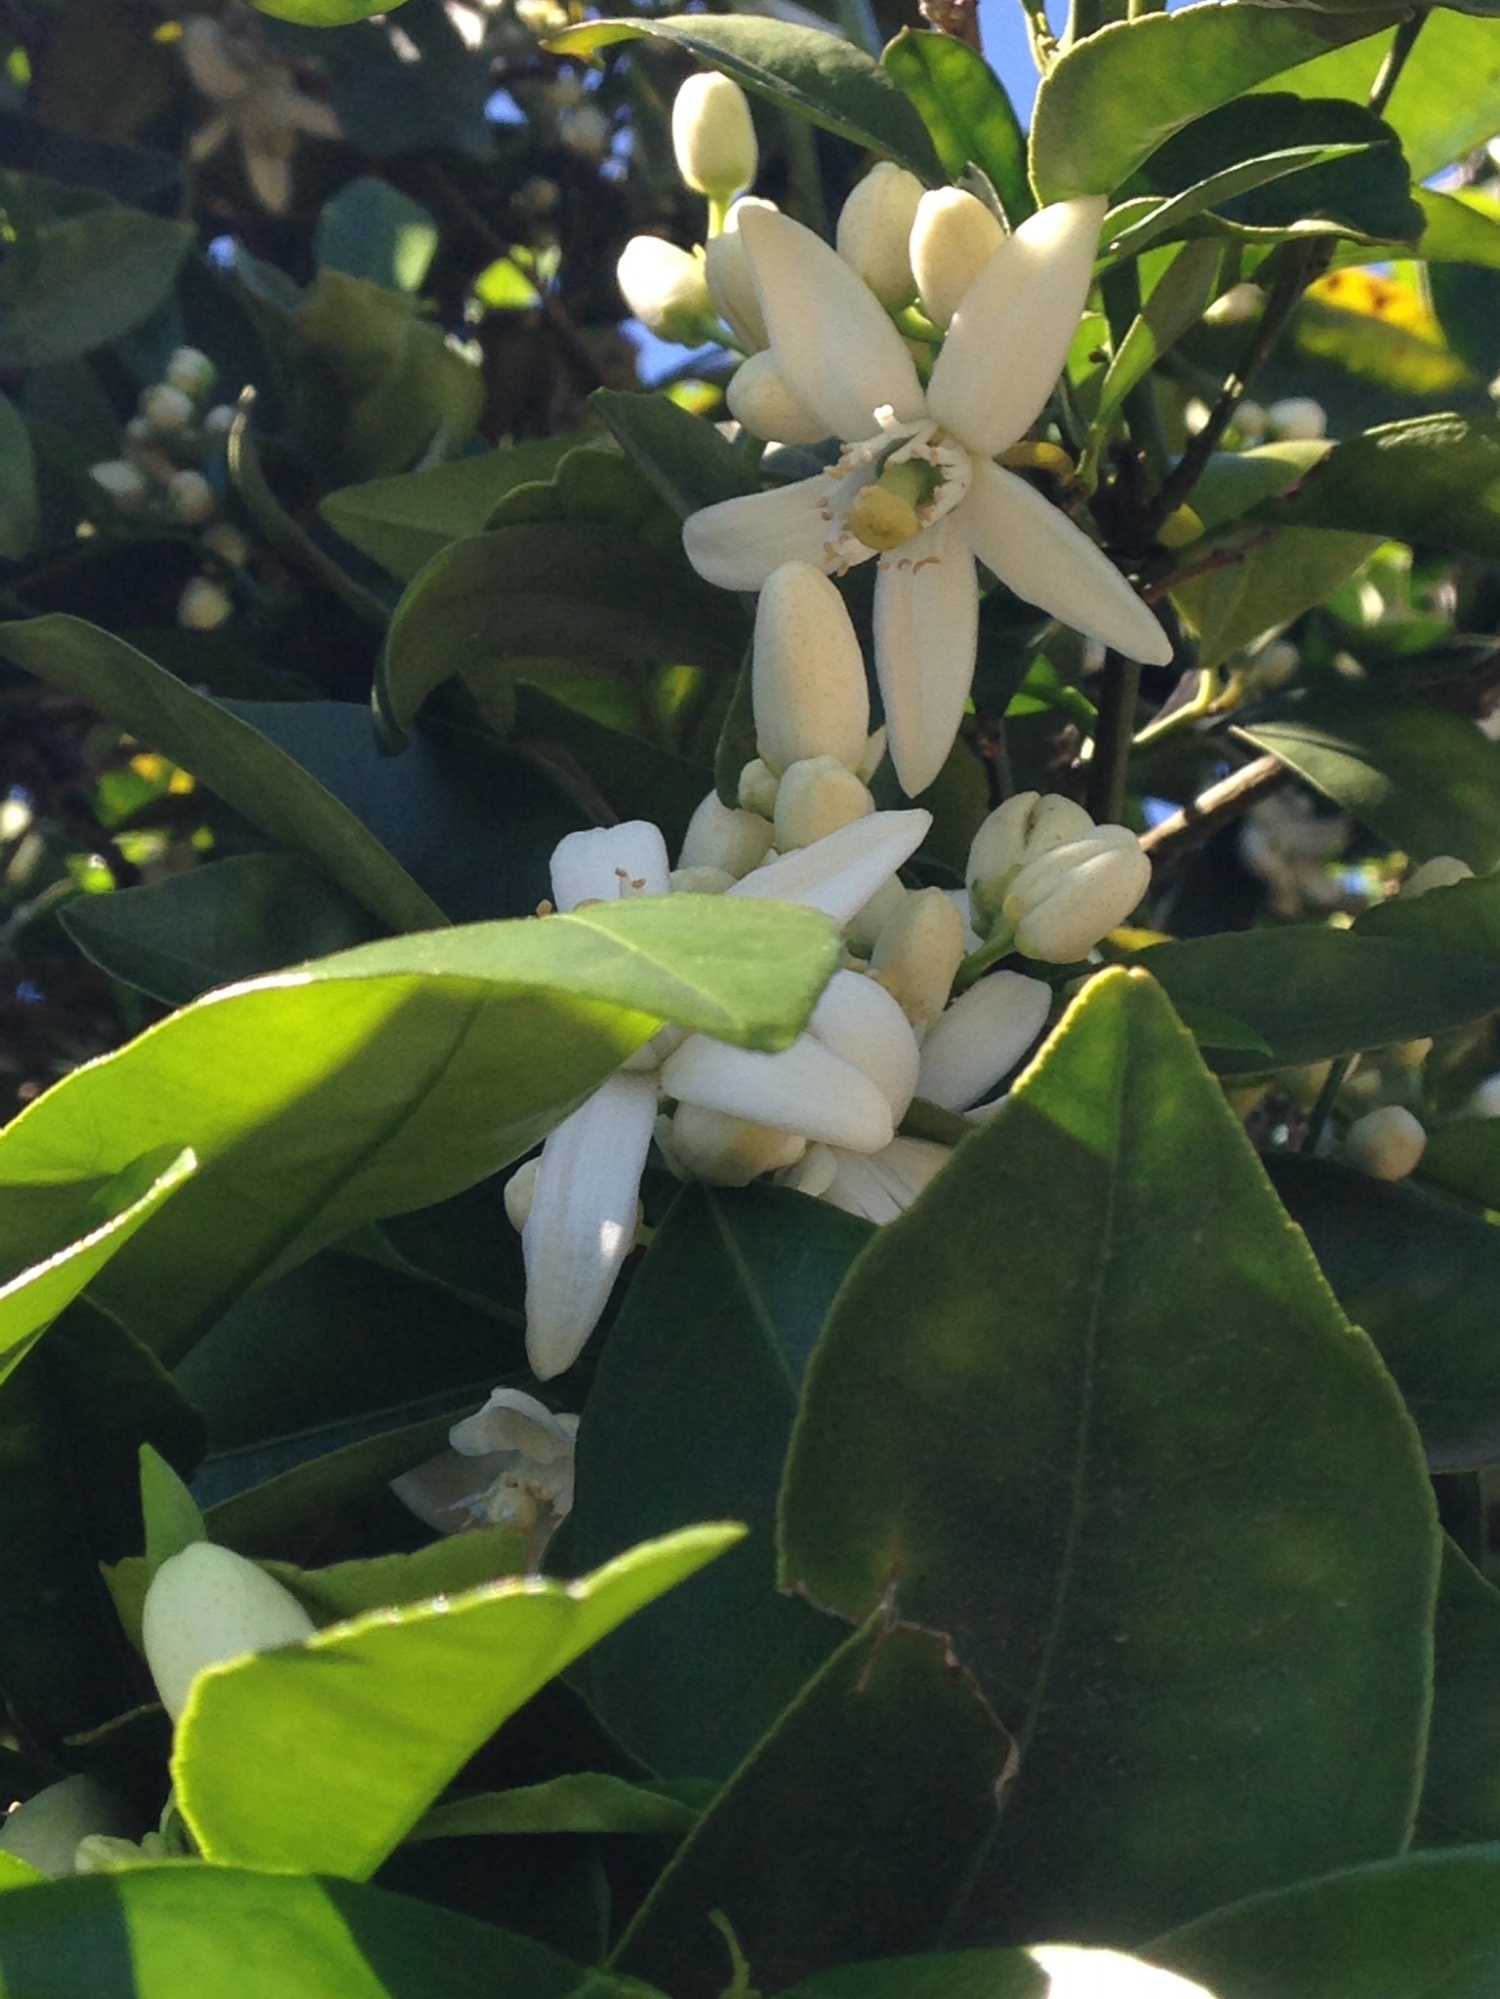 The smell of orange blossoms in March is amazing